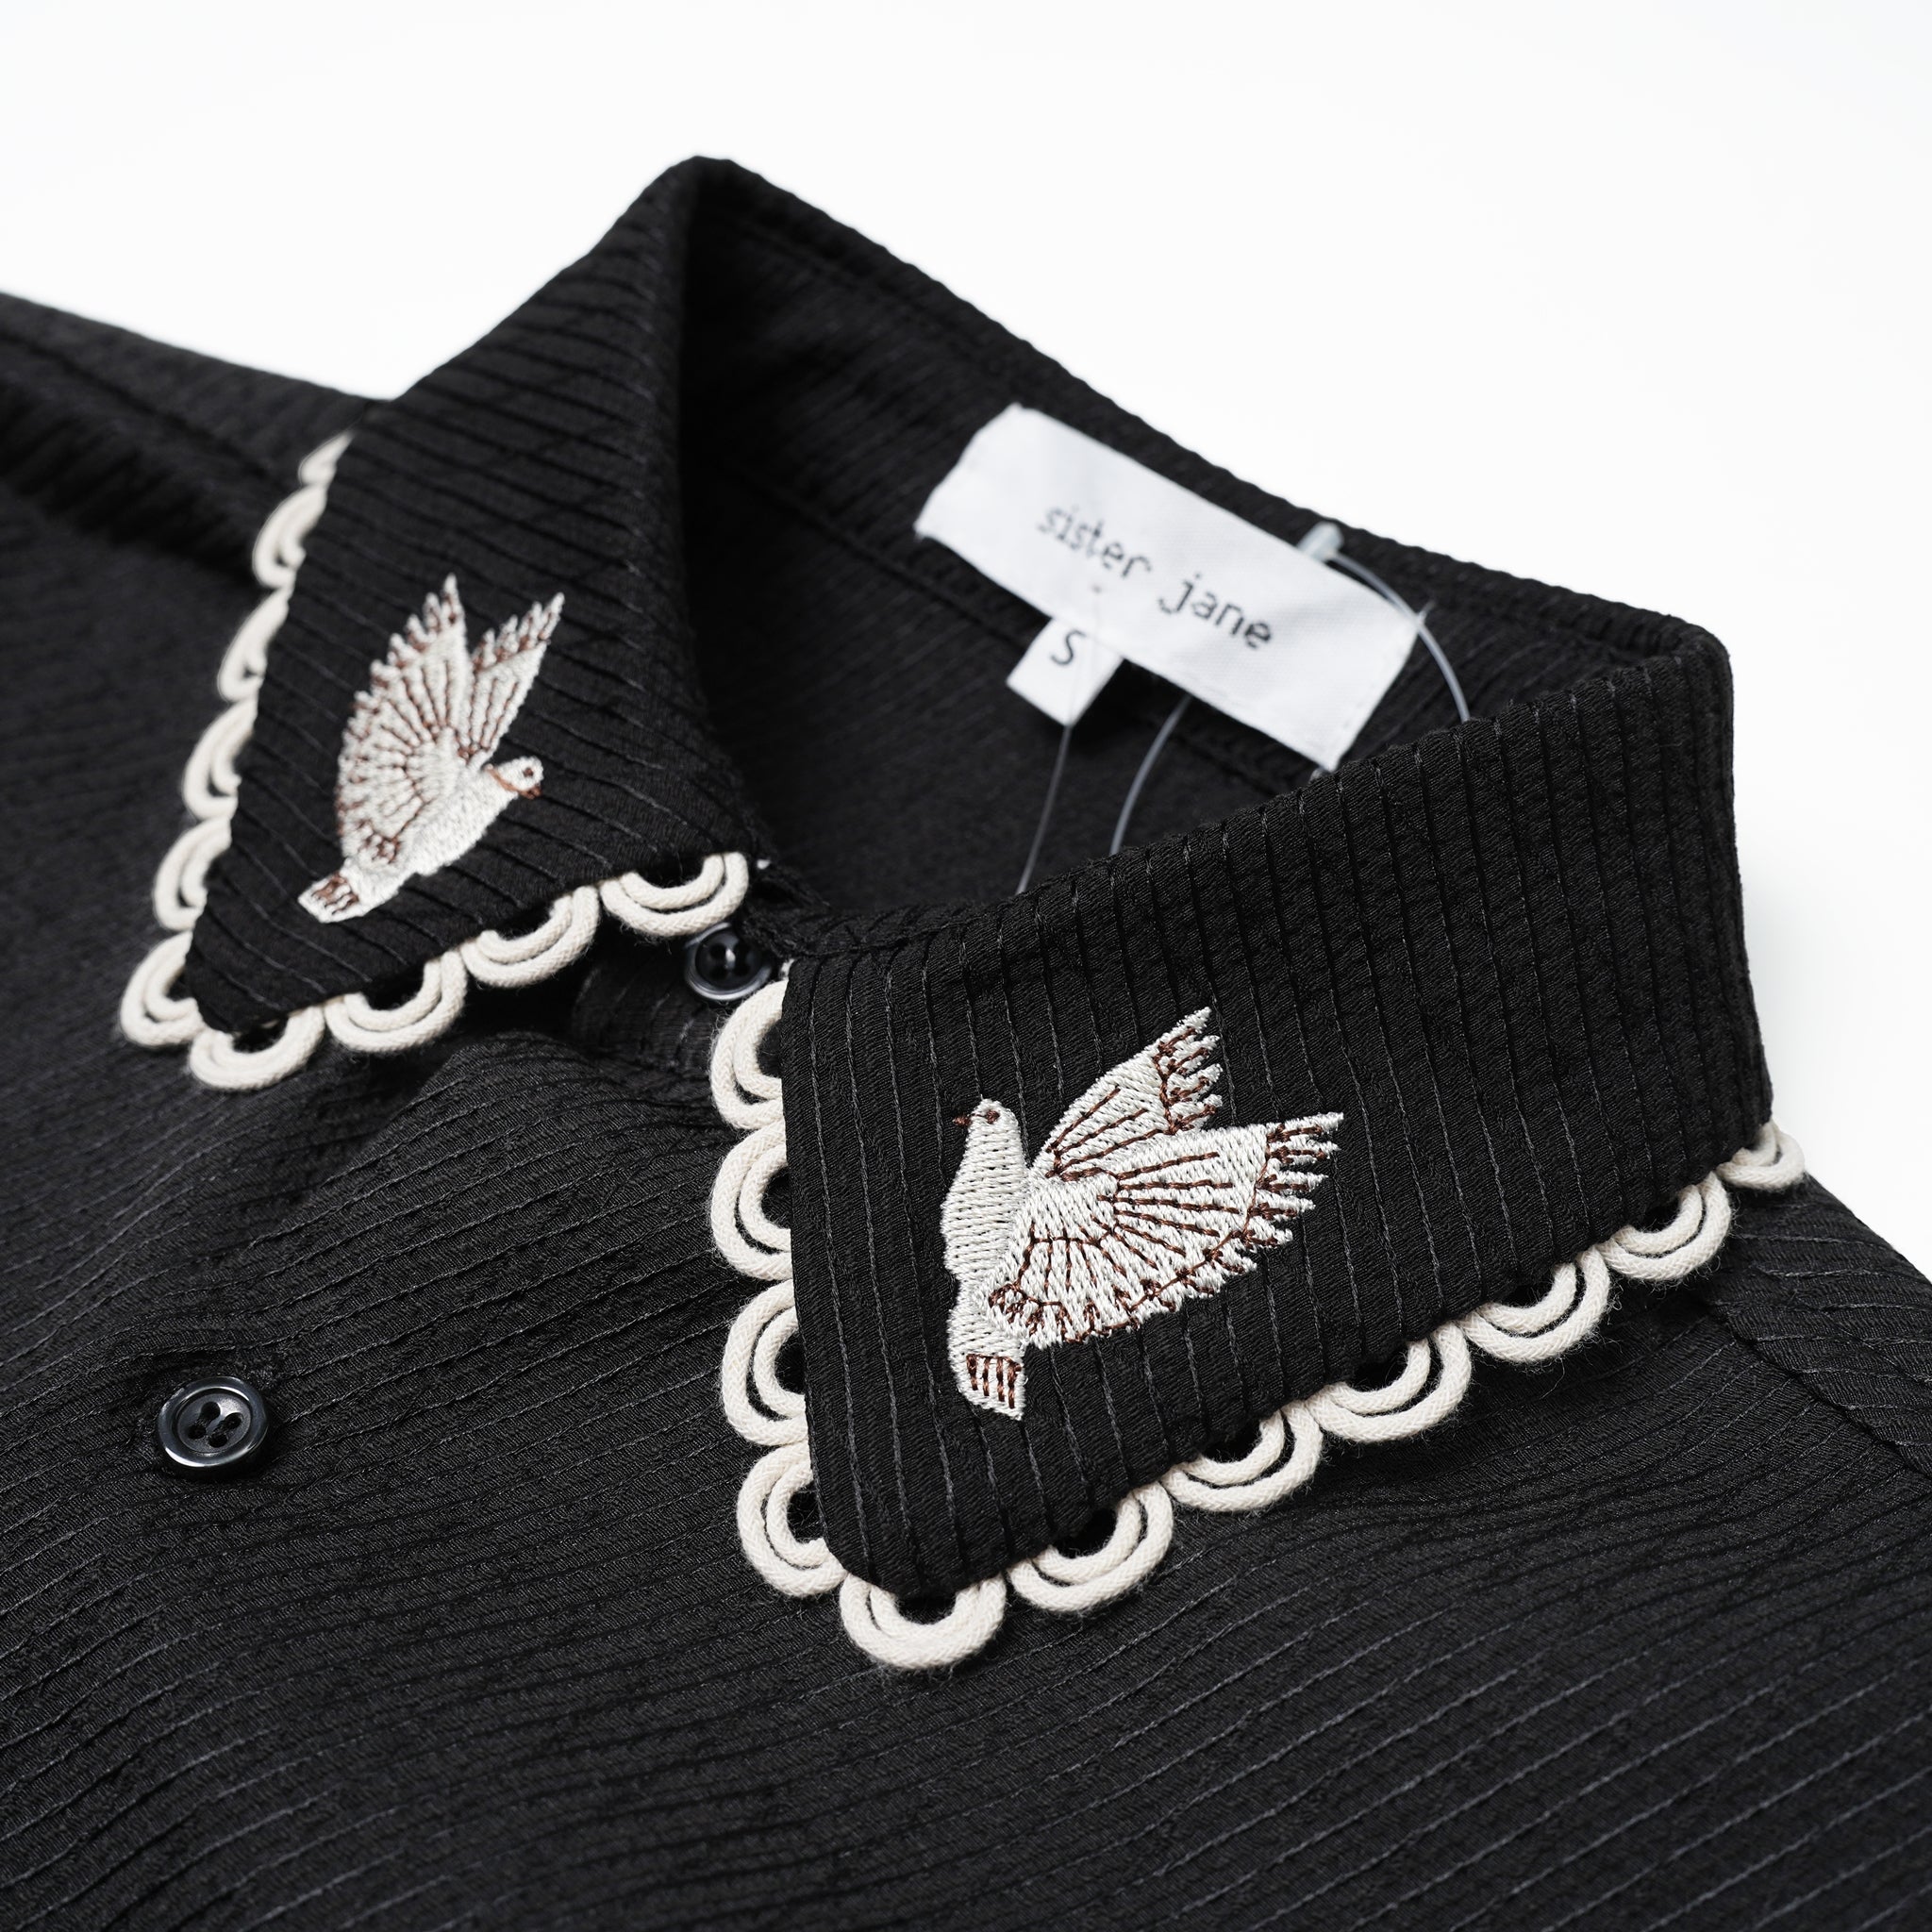 No:28SM02BLM052BLK | Name:Hector Dove Embroidered Shirt | Color